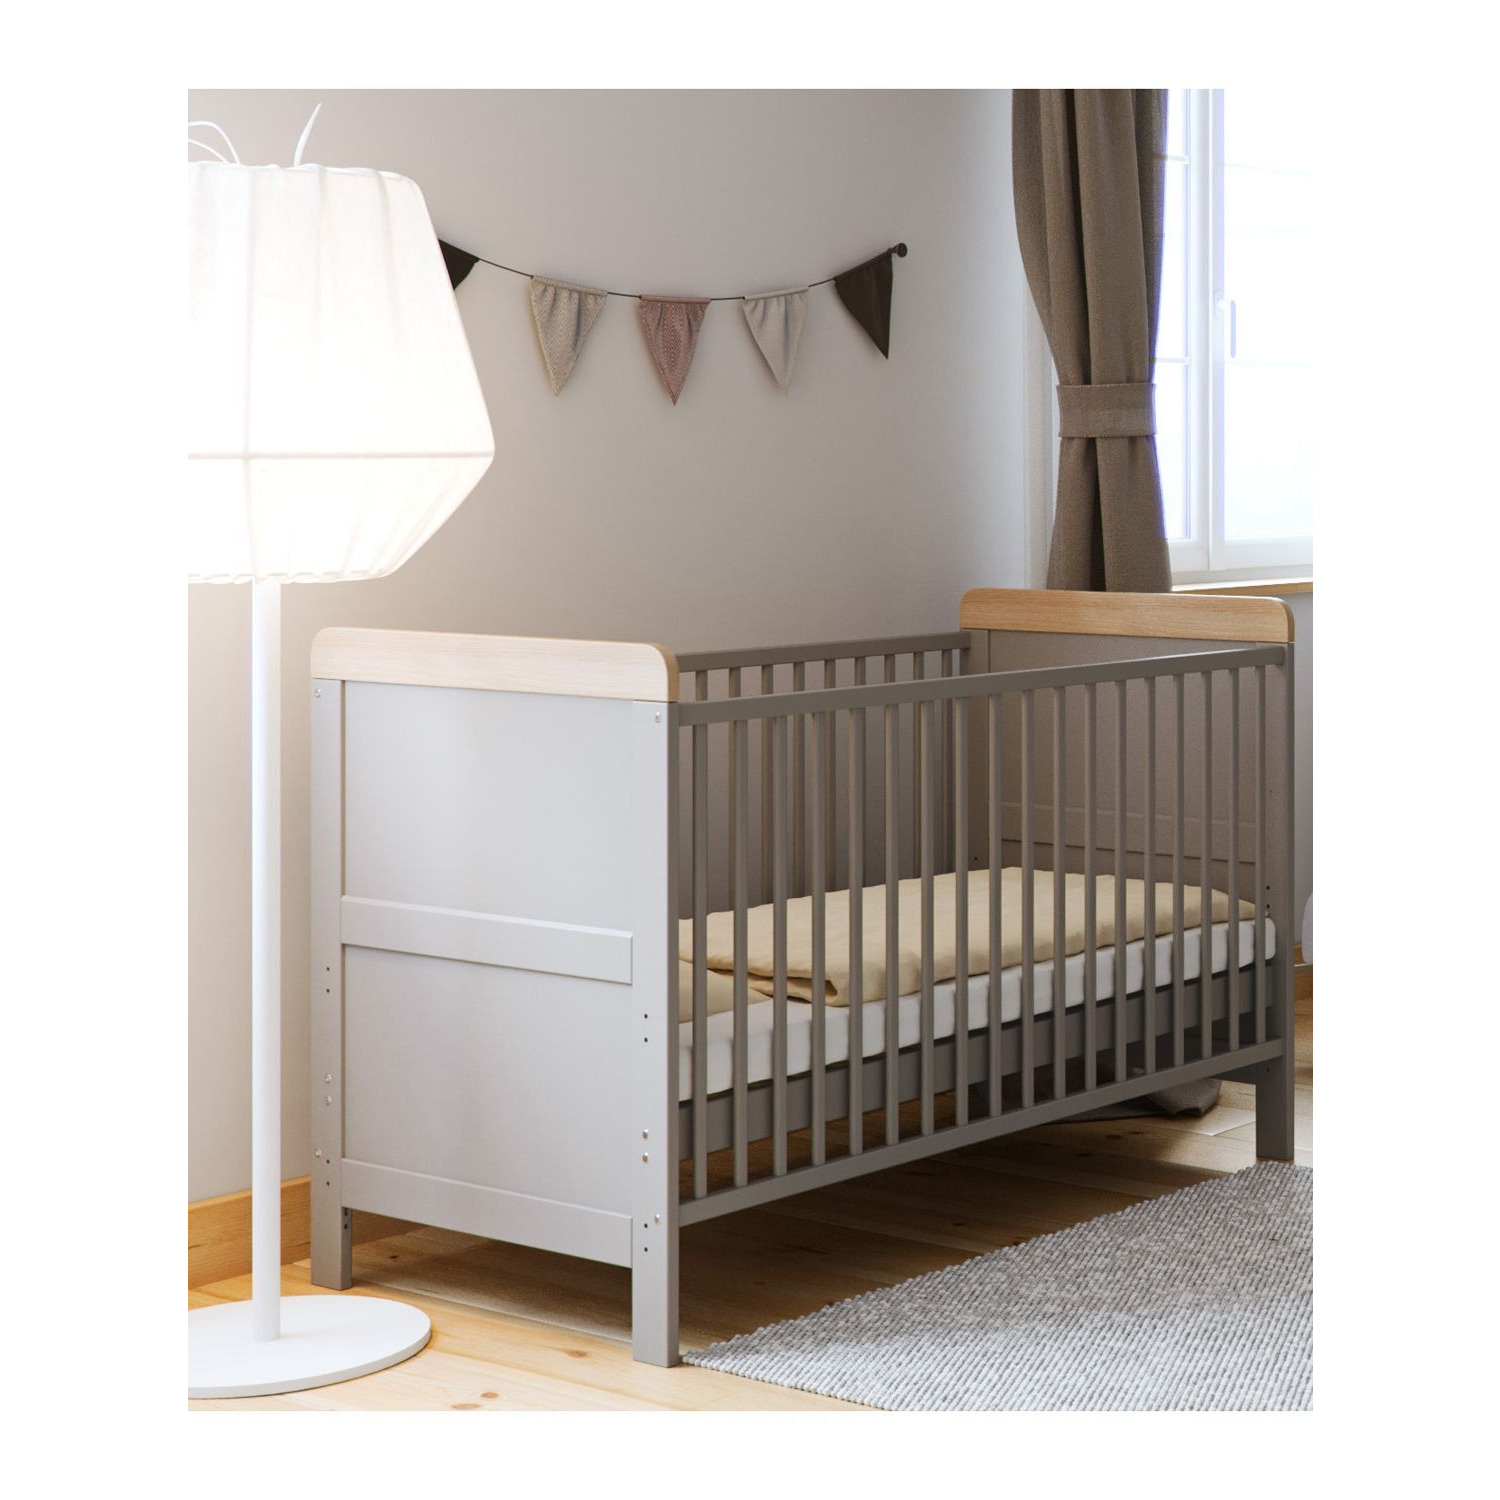 Little Acorns Classic Two-Tone Cotbed - image 1